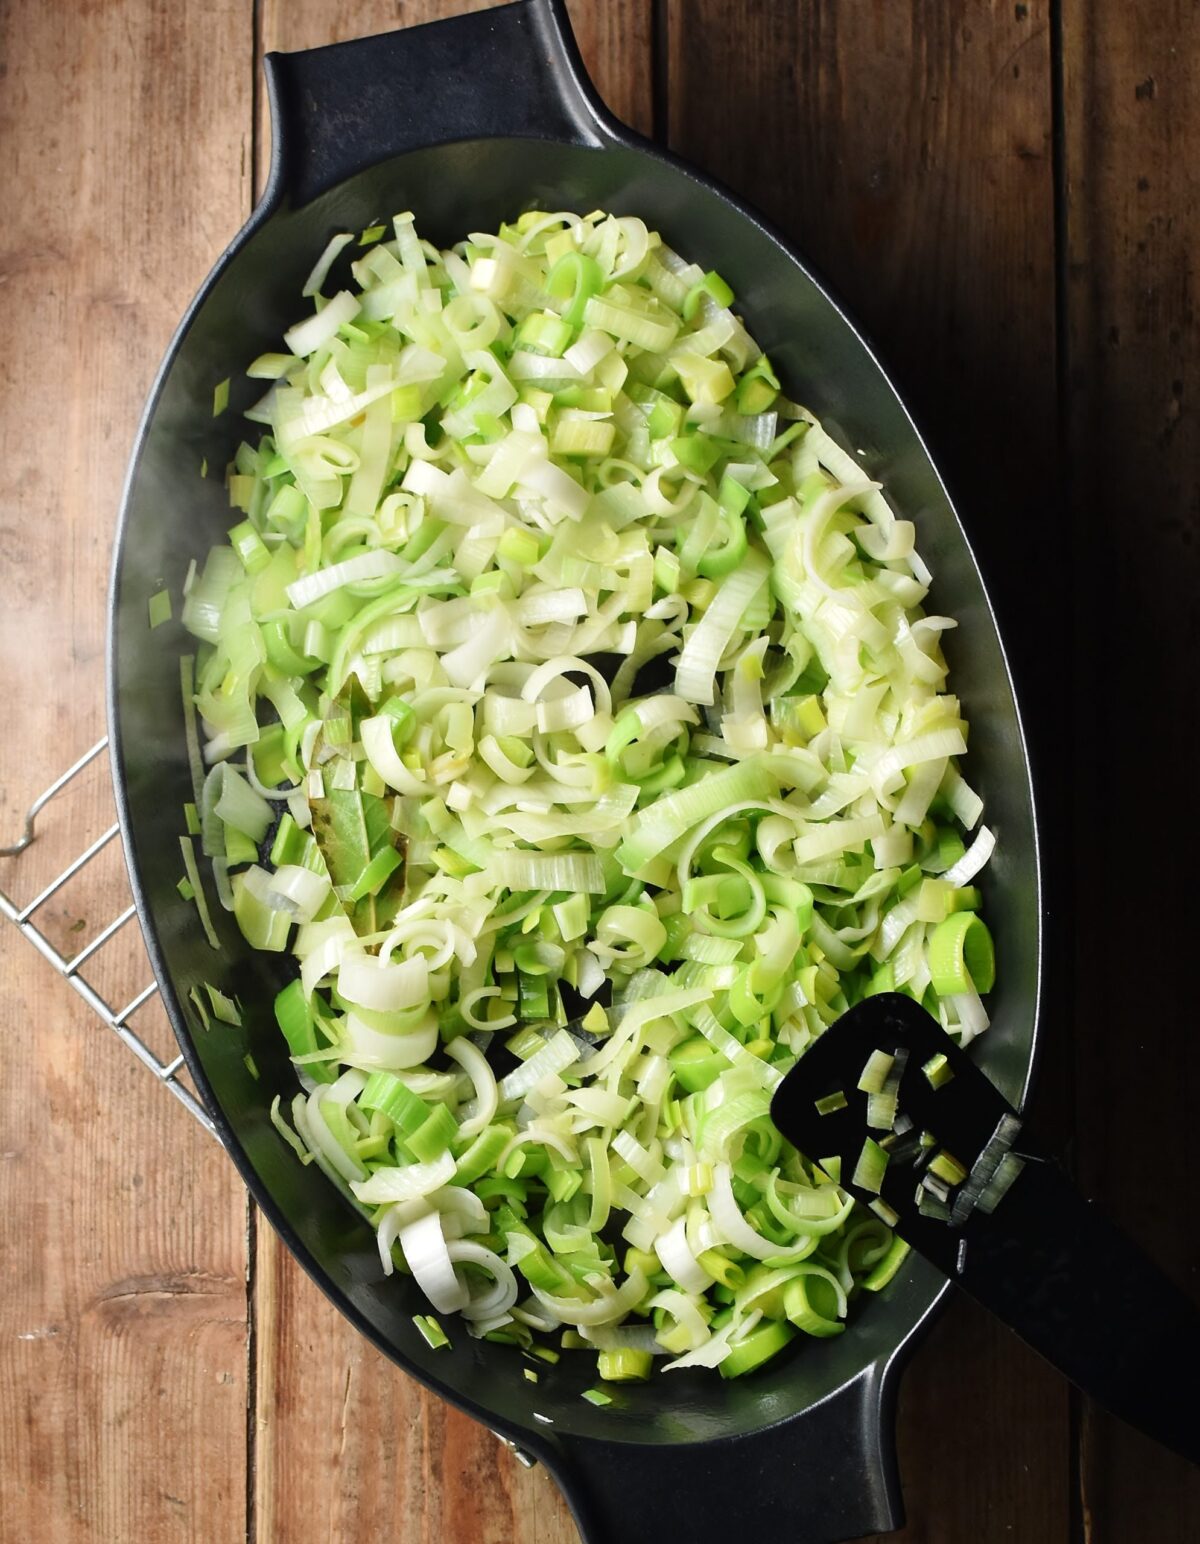 Fried chopped leeks in large oval, black dish. 